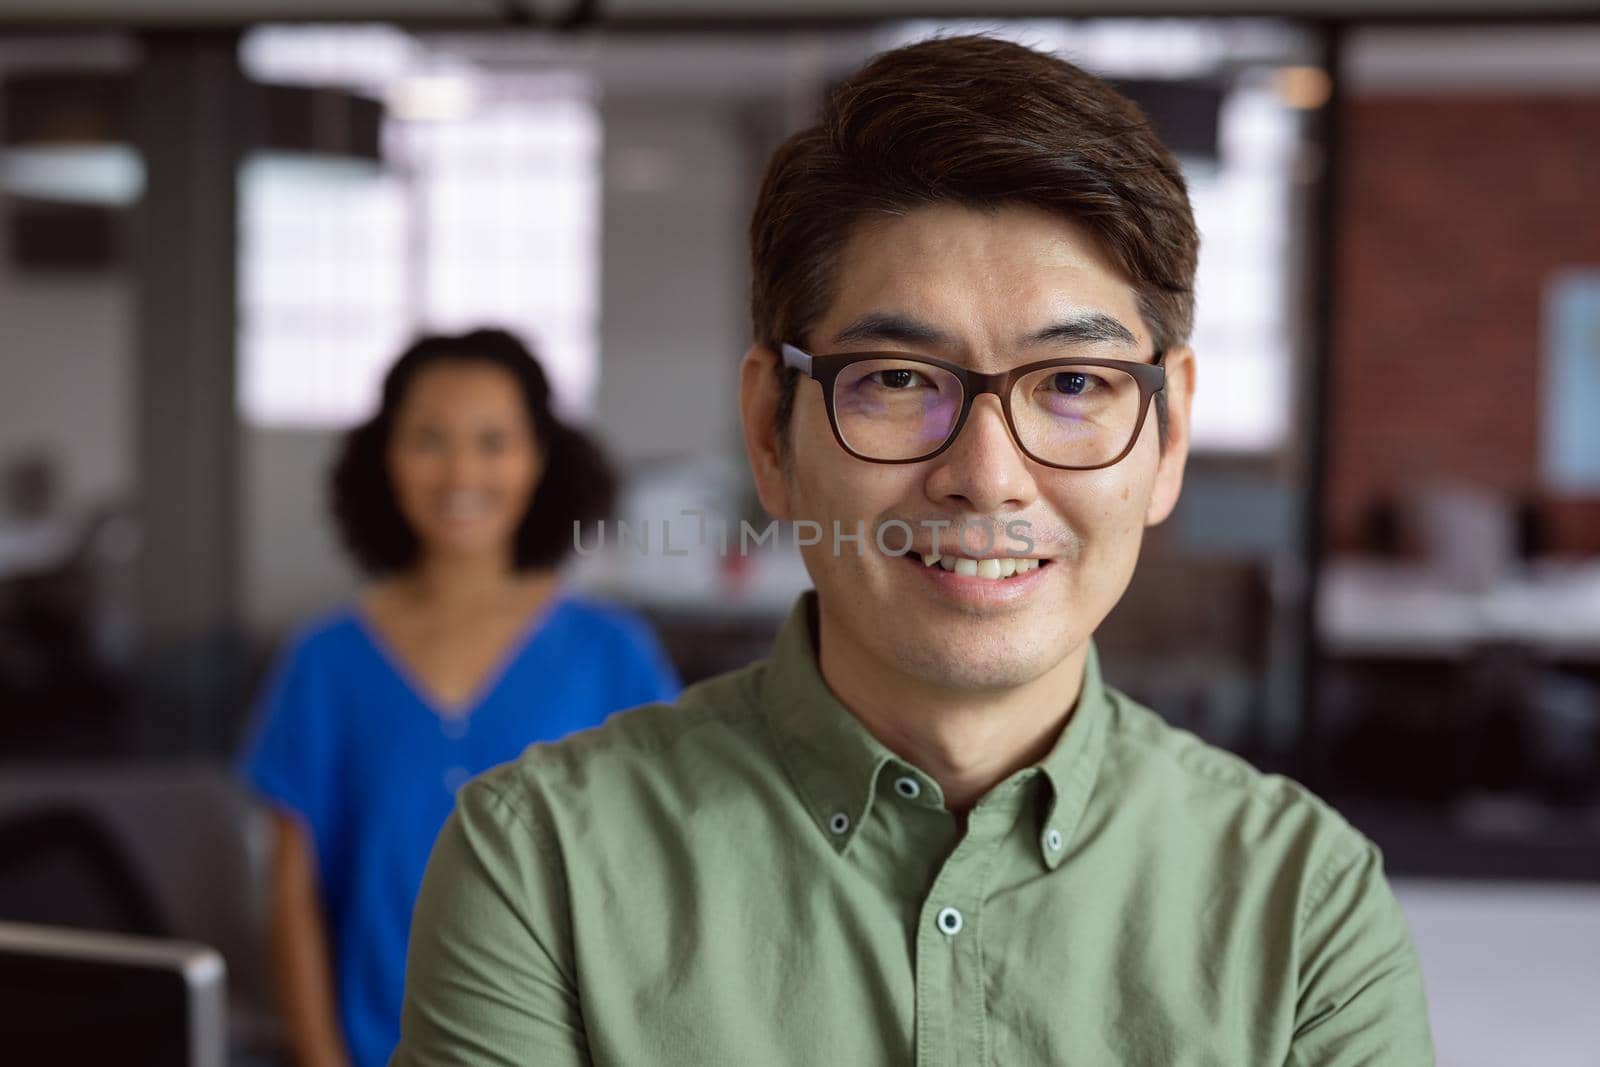 Portrait of smiling asian businessman standing in office with female colleague in background. working in business at a modern office.